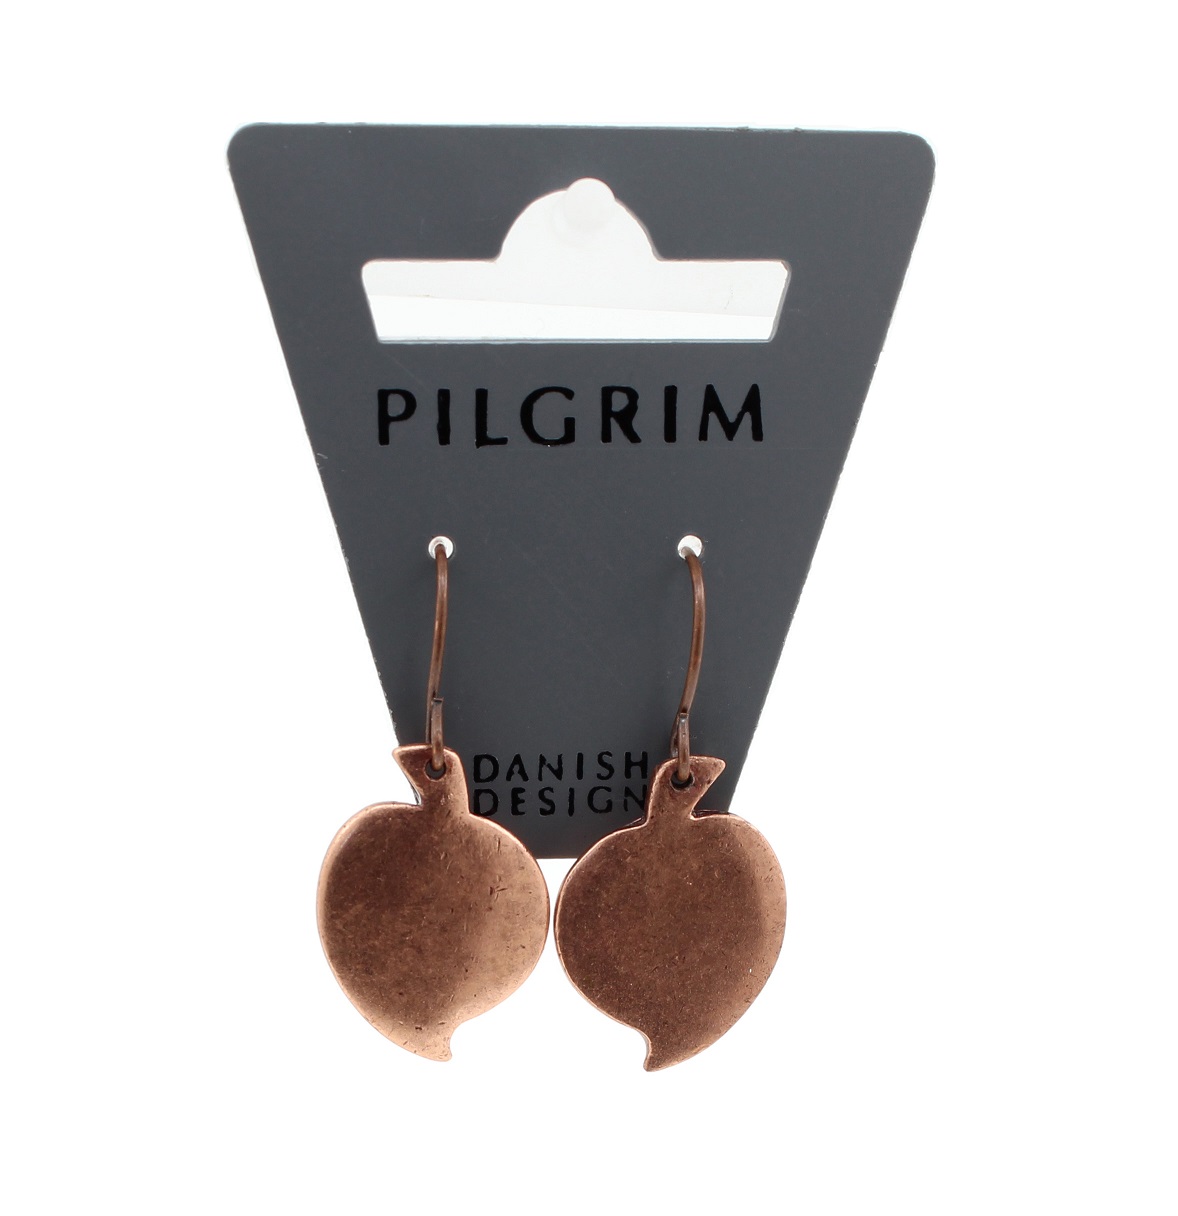 PILGRIM - Patina - Small Leaf Earrings Style 1 - Copper Plate BNWT